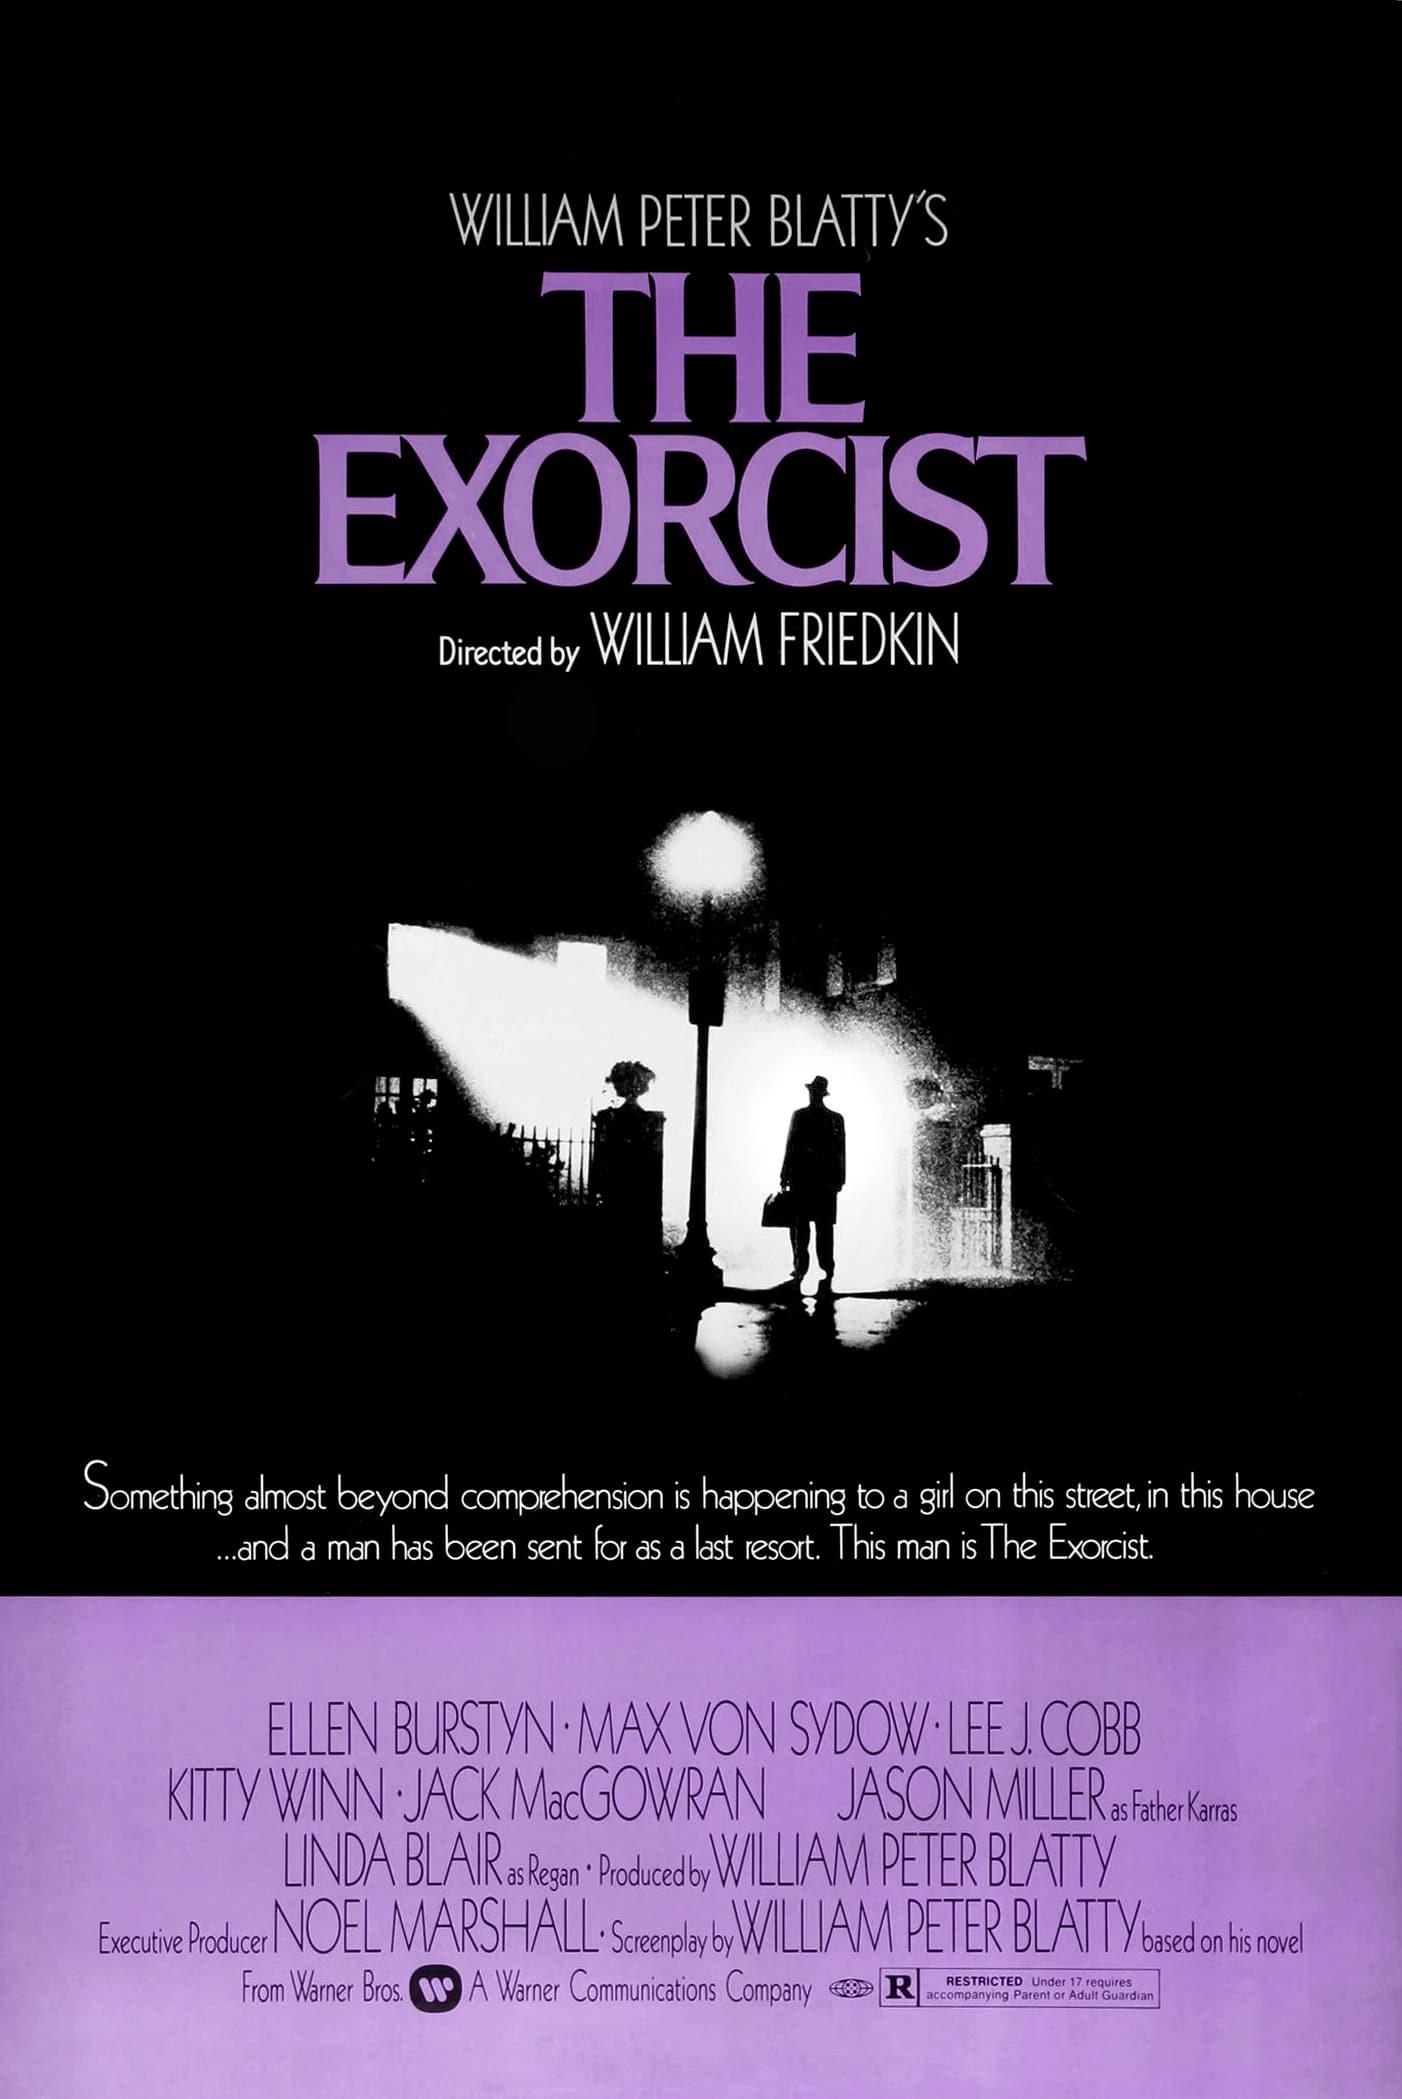 The Exorcist (1973)-Horror movies according to IMDB Ratings